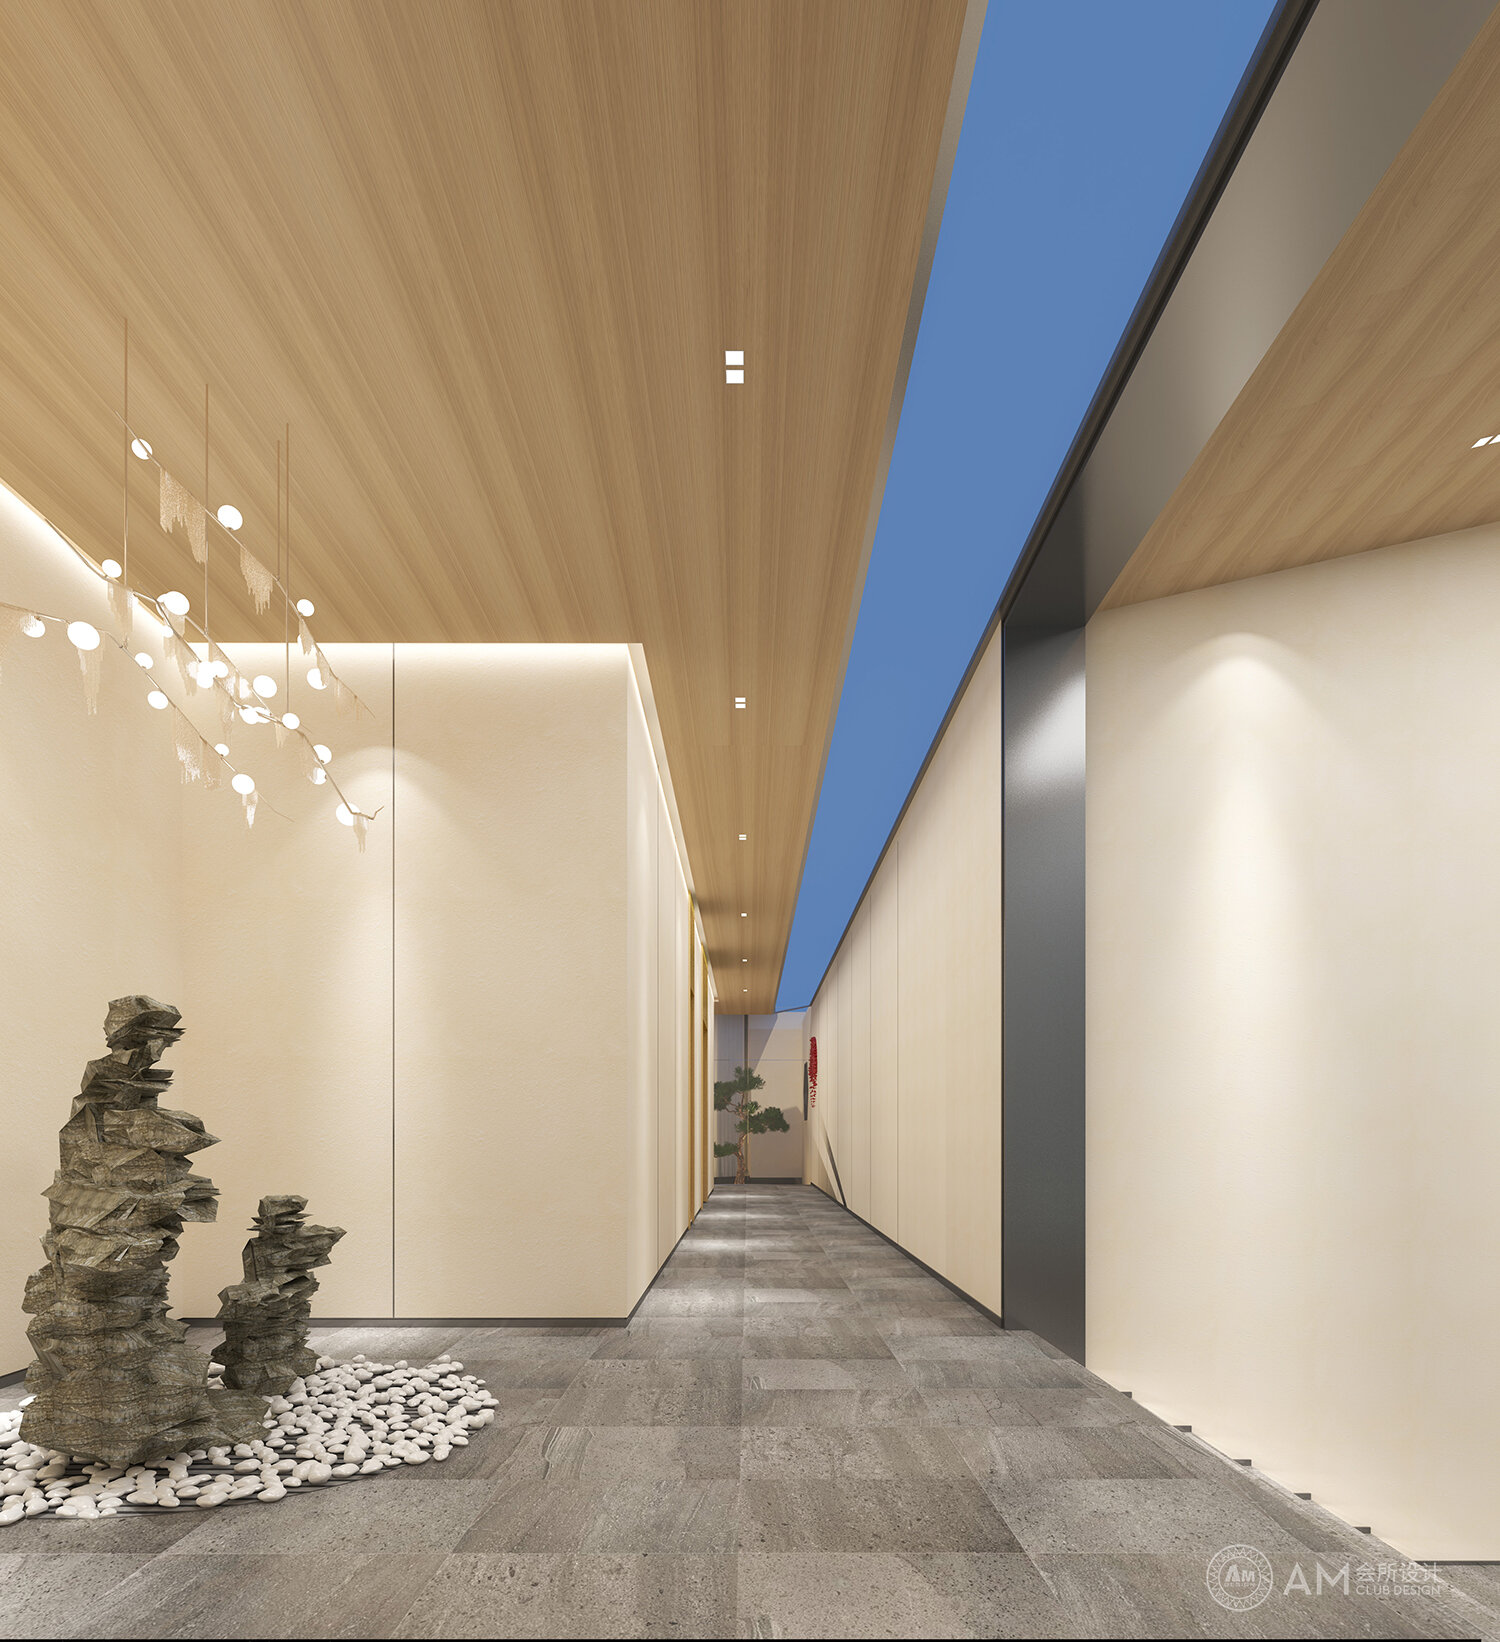 AM DESIGN | Corridor design of the corporate clubhouse in Aobei Science and Technology Park